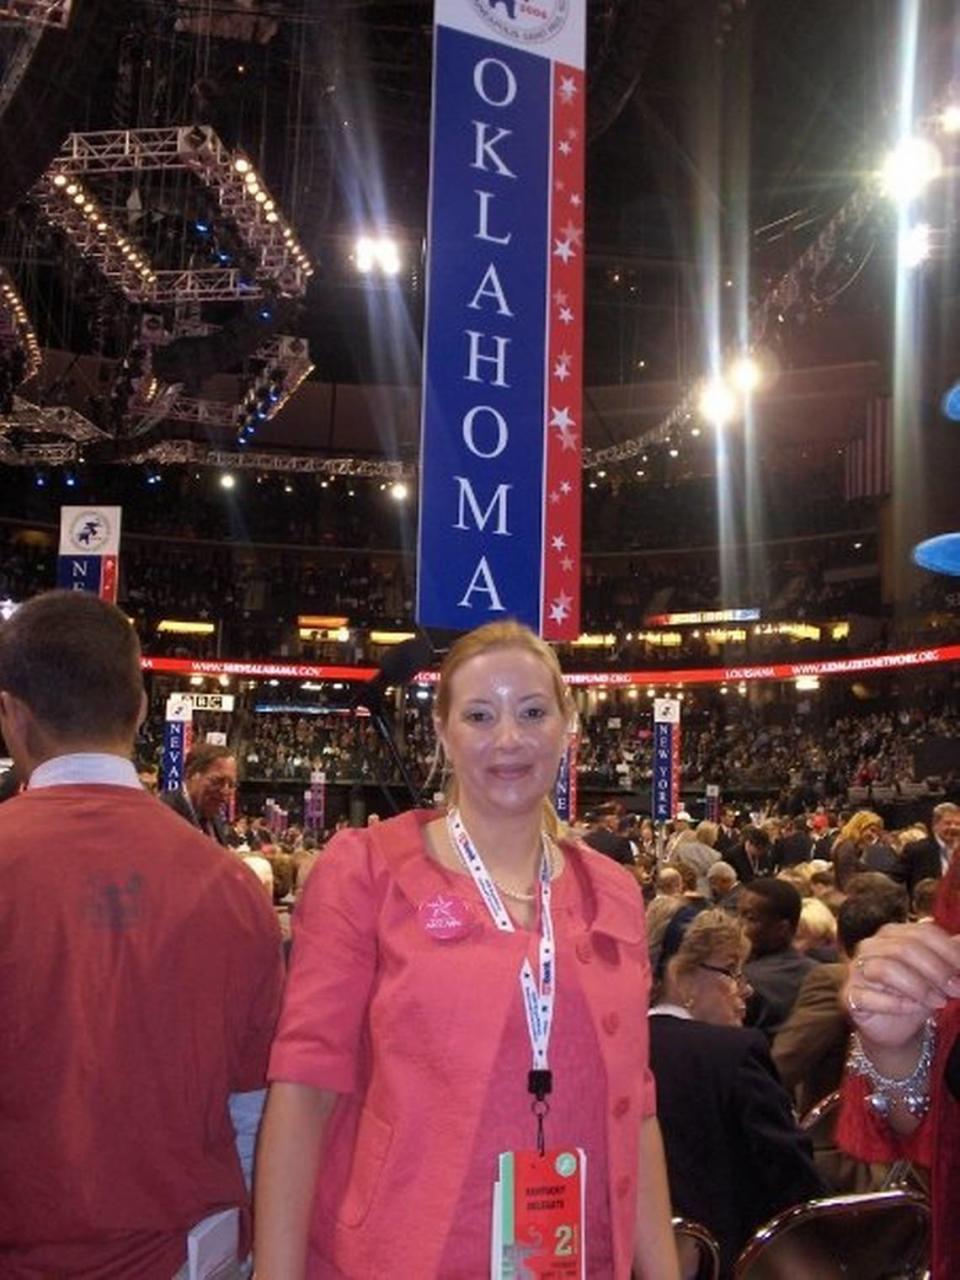 Sarah Reidy-Jones, pictured here at the 2008 Republican National Convention, will serve as a delegate from North Carolina at this year’s nominating convention in Milwaukee, Wisconsin.